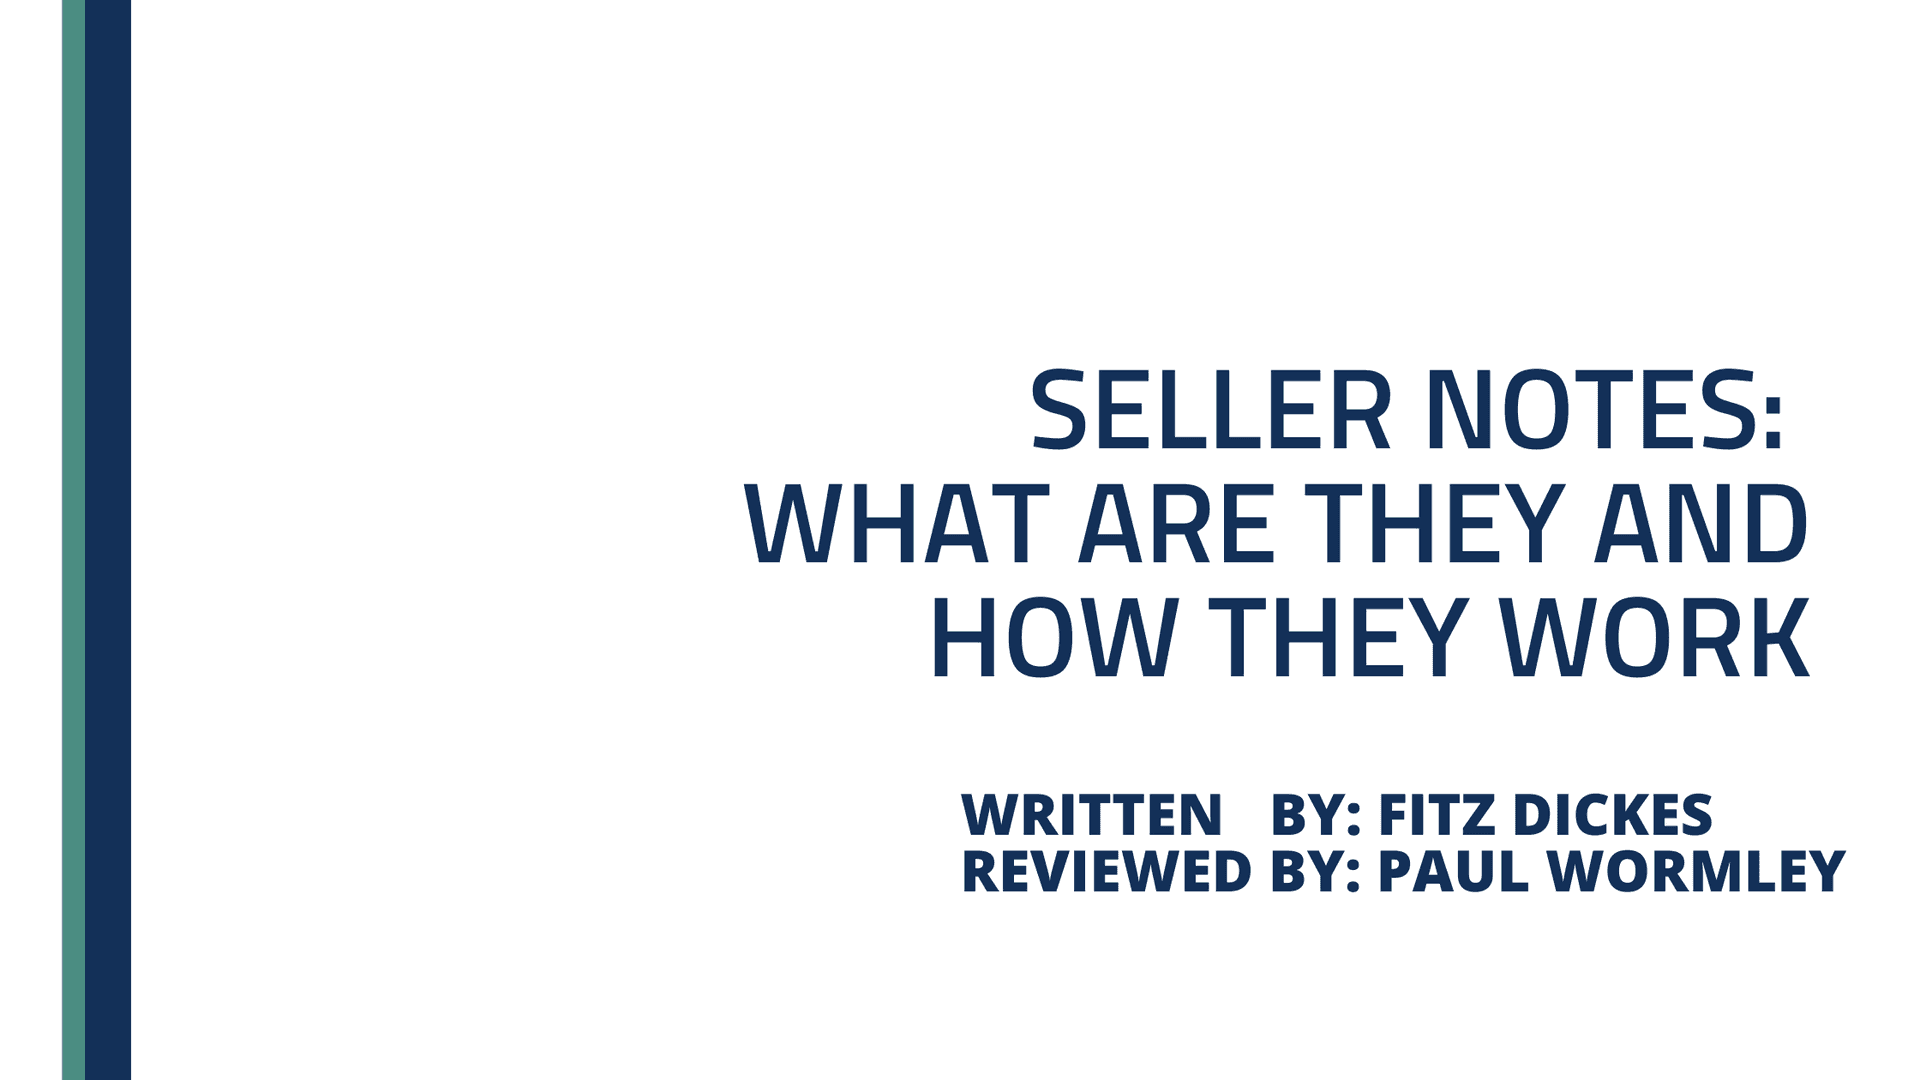 Seller Notes: What Are They Are and How They Work